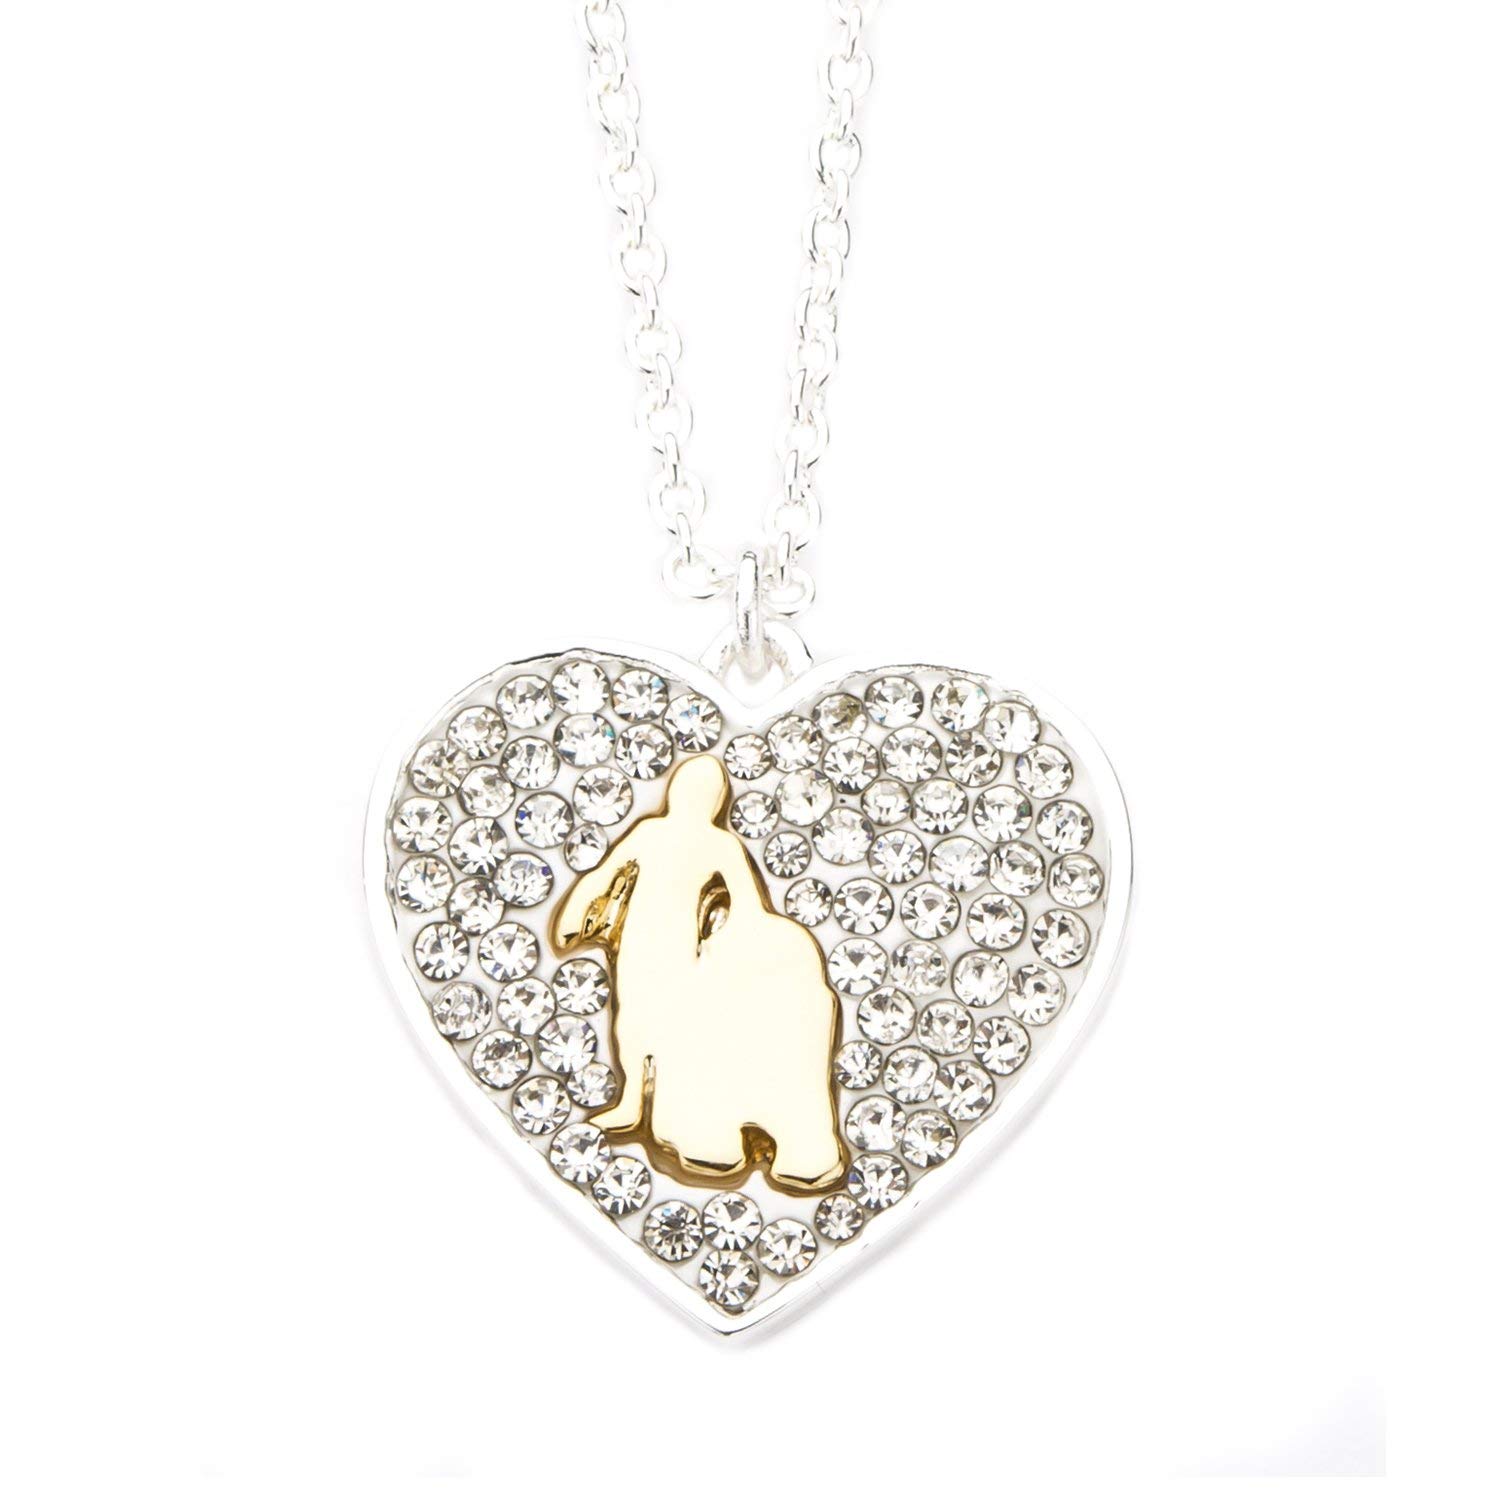 Body Vibe x Star Wars C-3PO and R2-D2 Rhinestone Heart Necklace on Amazon